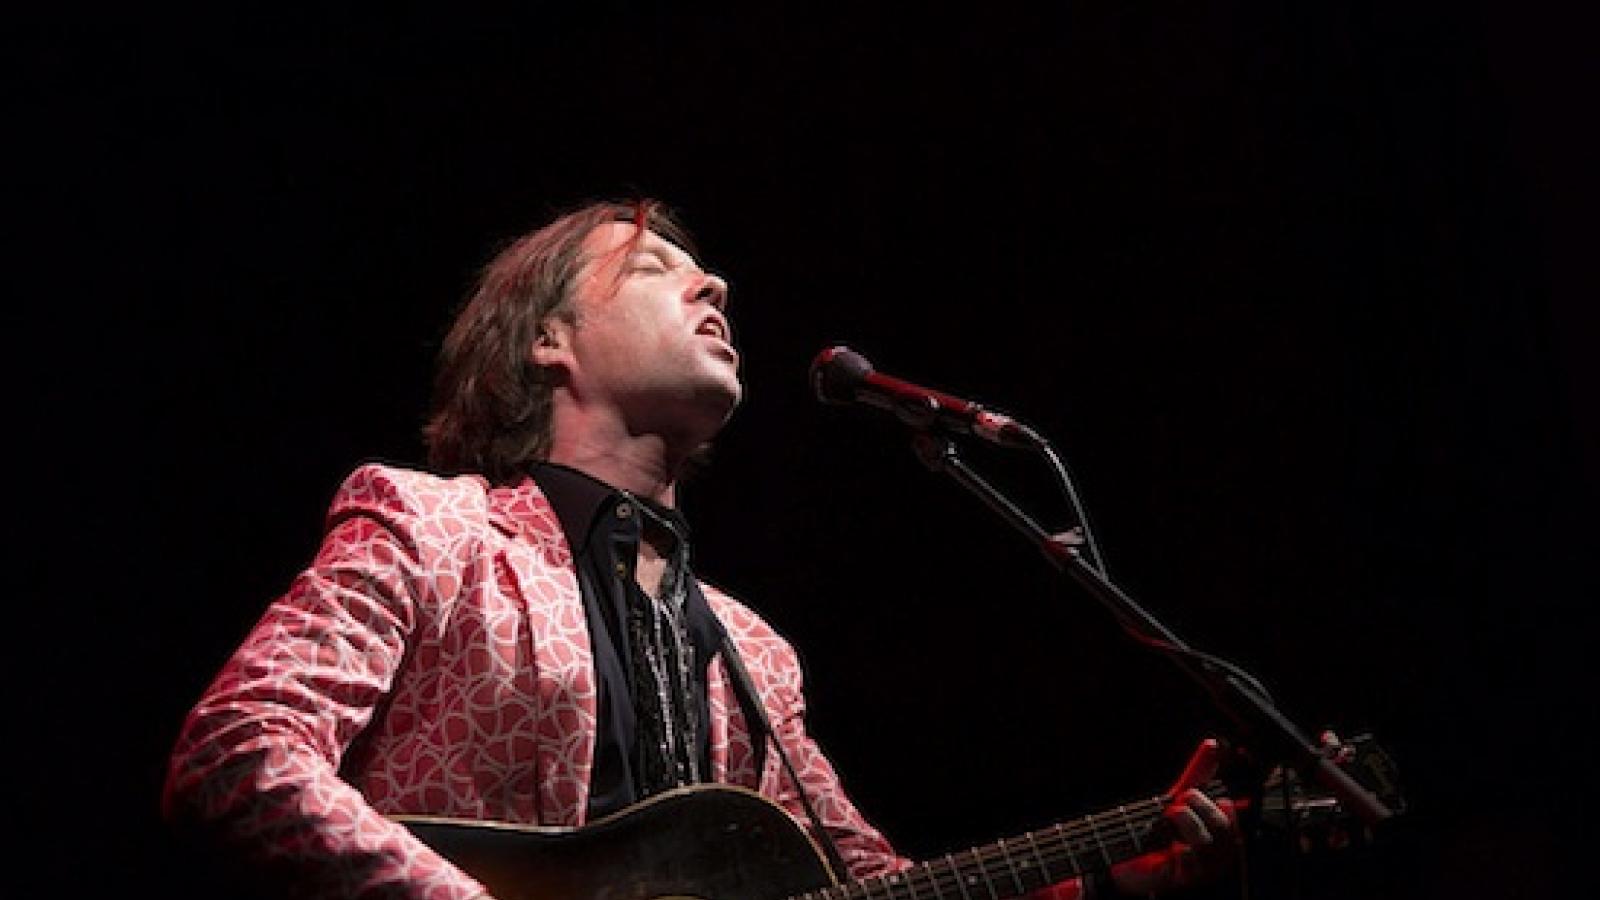 a white man with medium long hair in a patterned red jacket plays a guitar and sings into a microphone